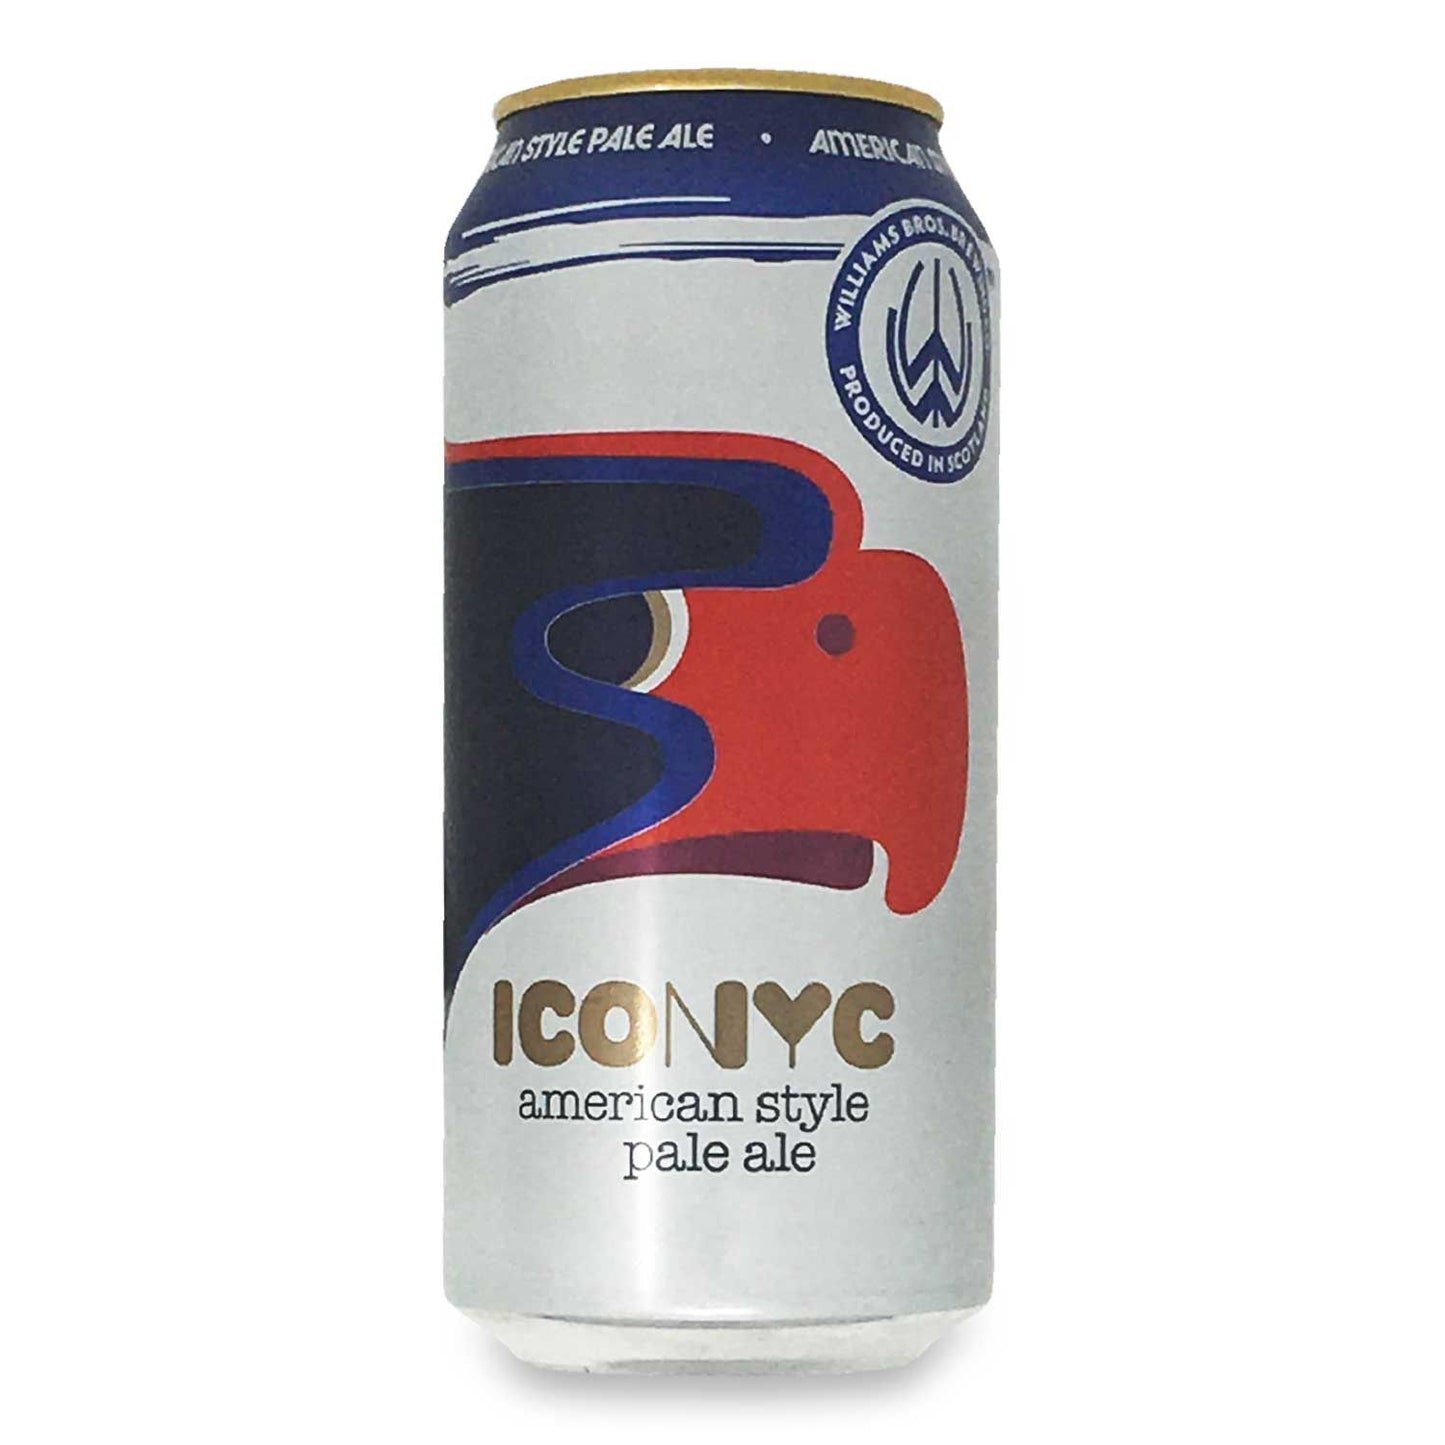 Williams Bros Brewing Co. Iconyc American Style Pale Ale 440ml